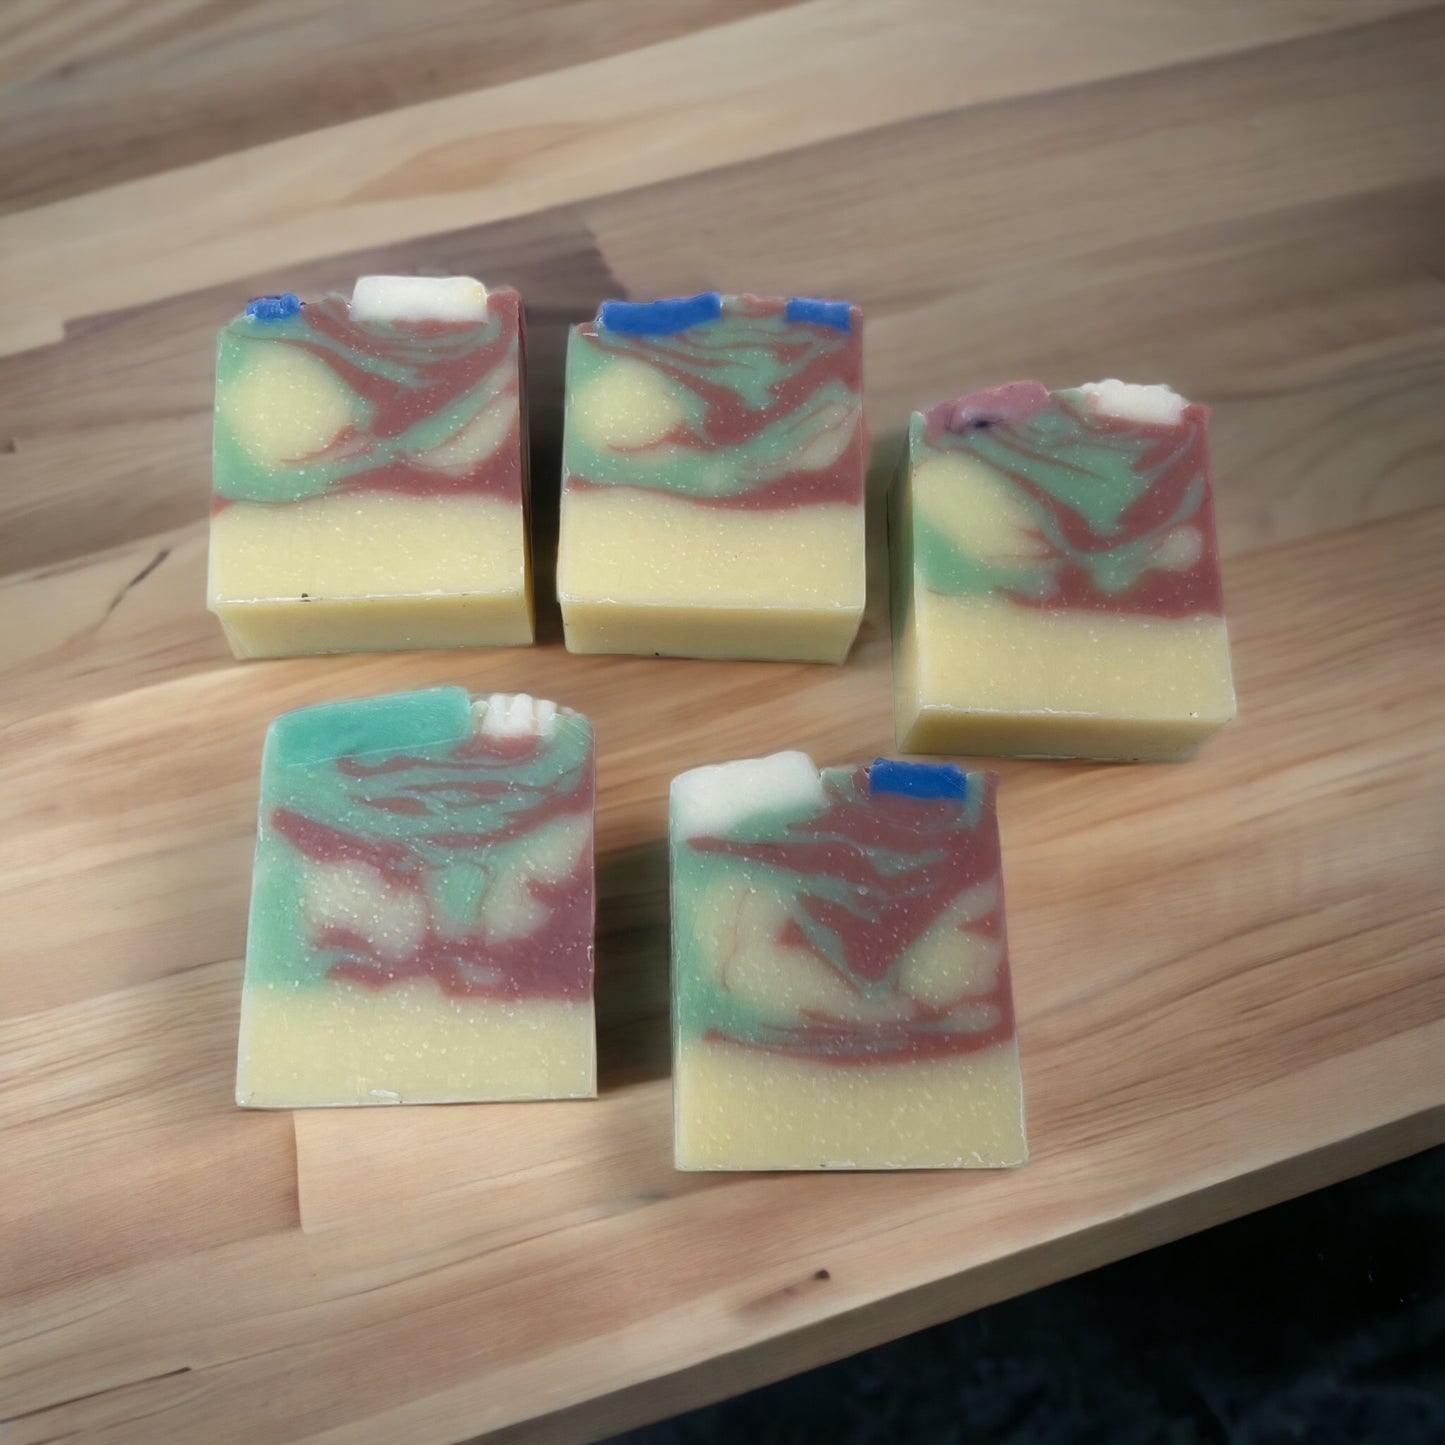 How We Make Our Natural, Handmade Bar Soaps – Slow North